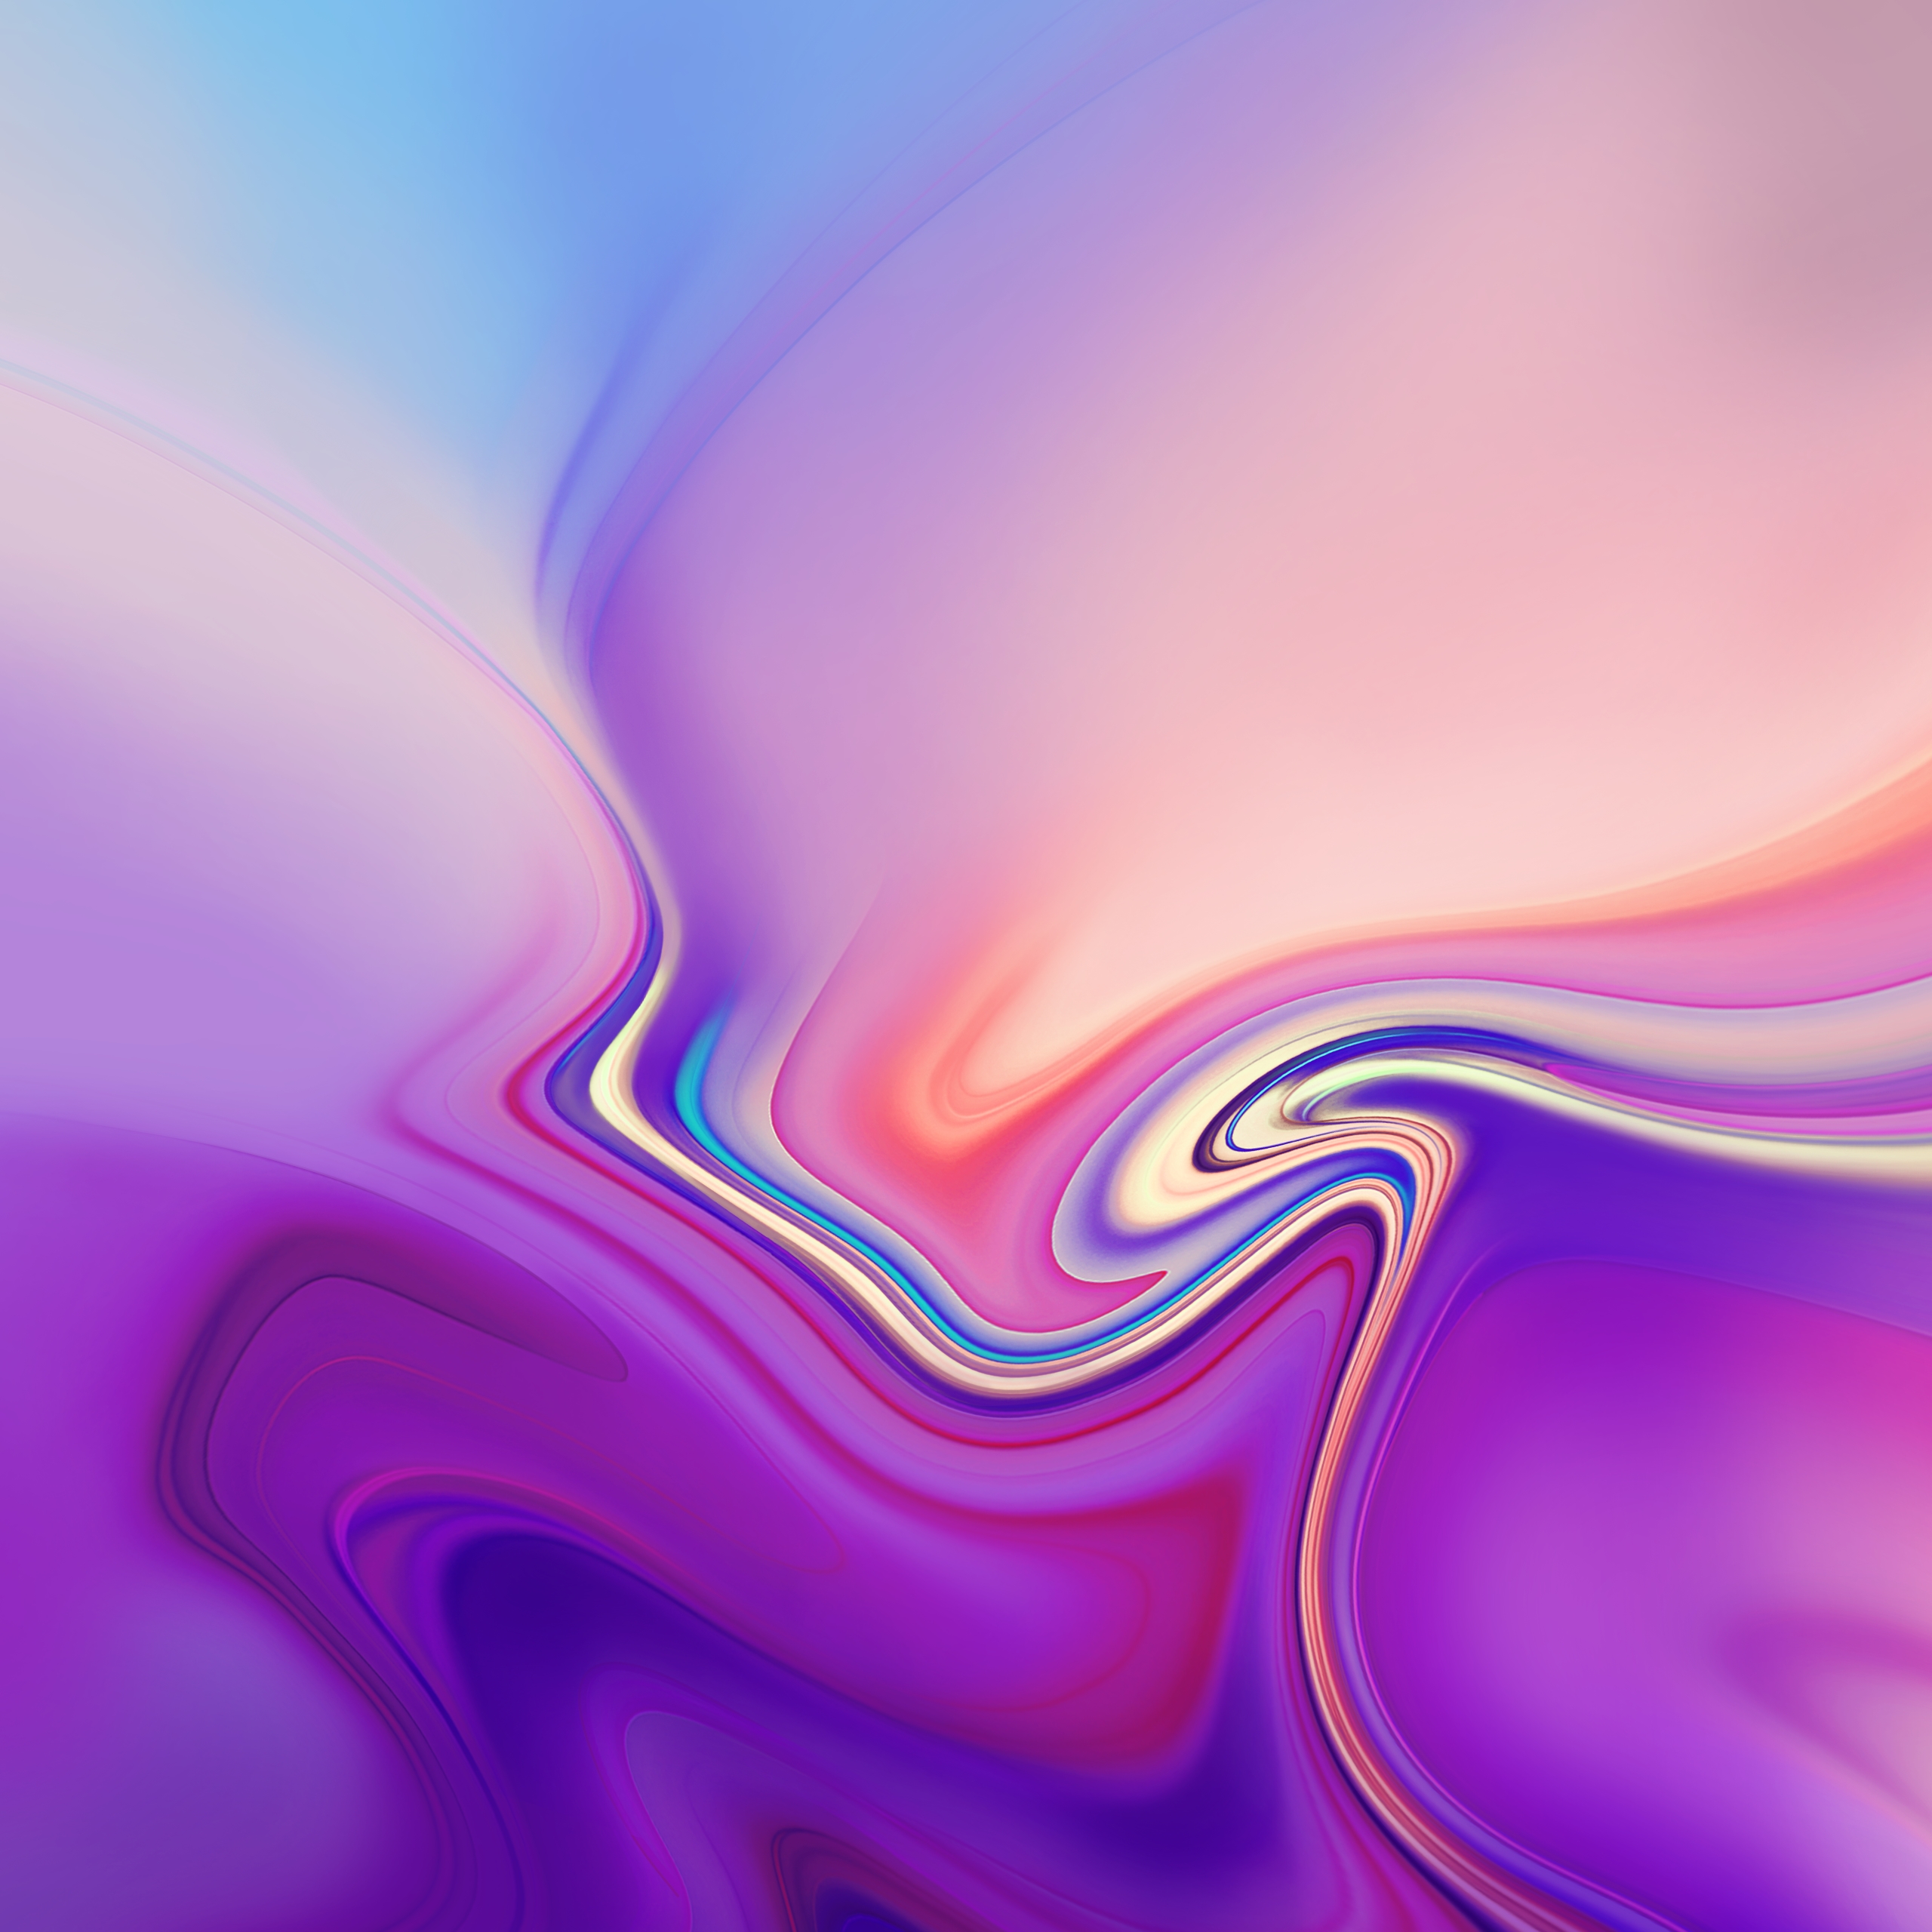 Samsung Galaxy Note 9 Wallpapers Are Here All 12 In Full Resolution